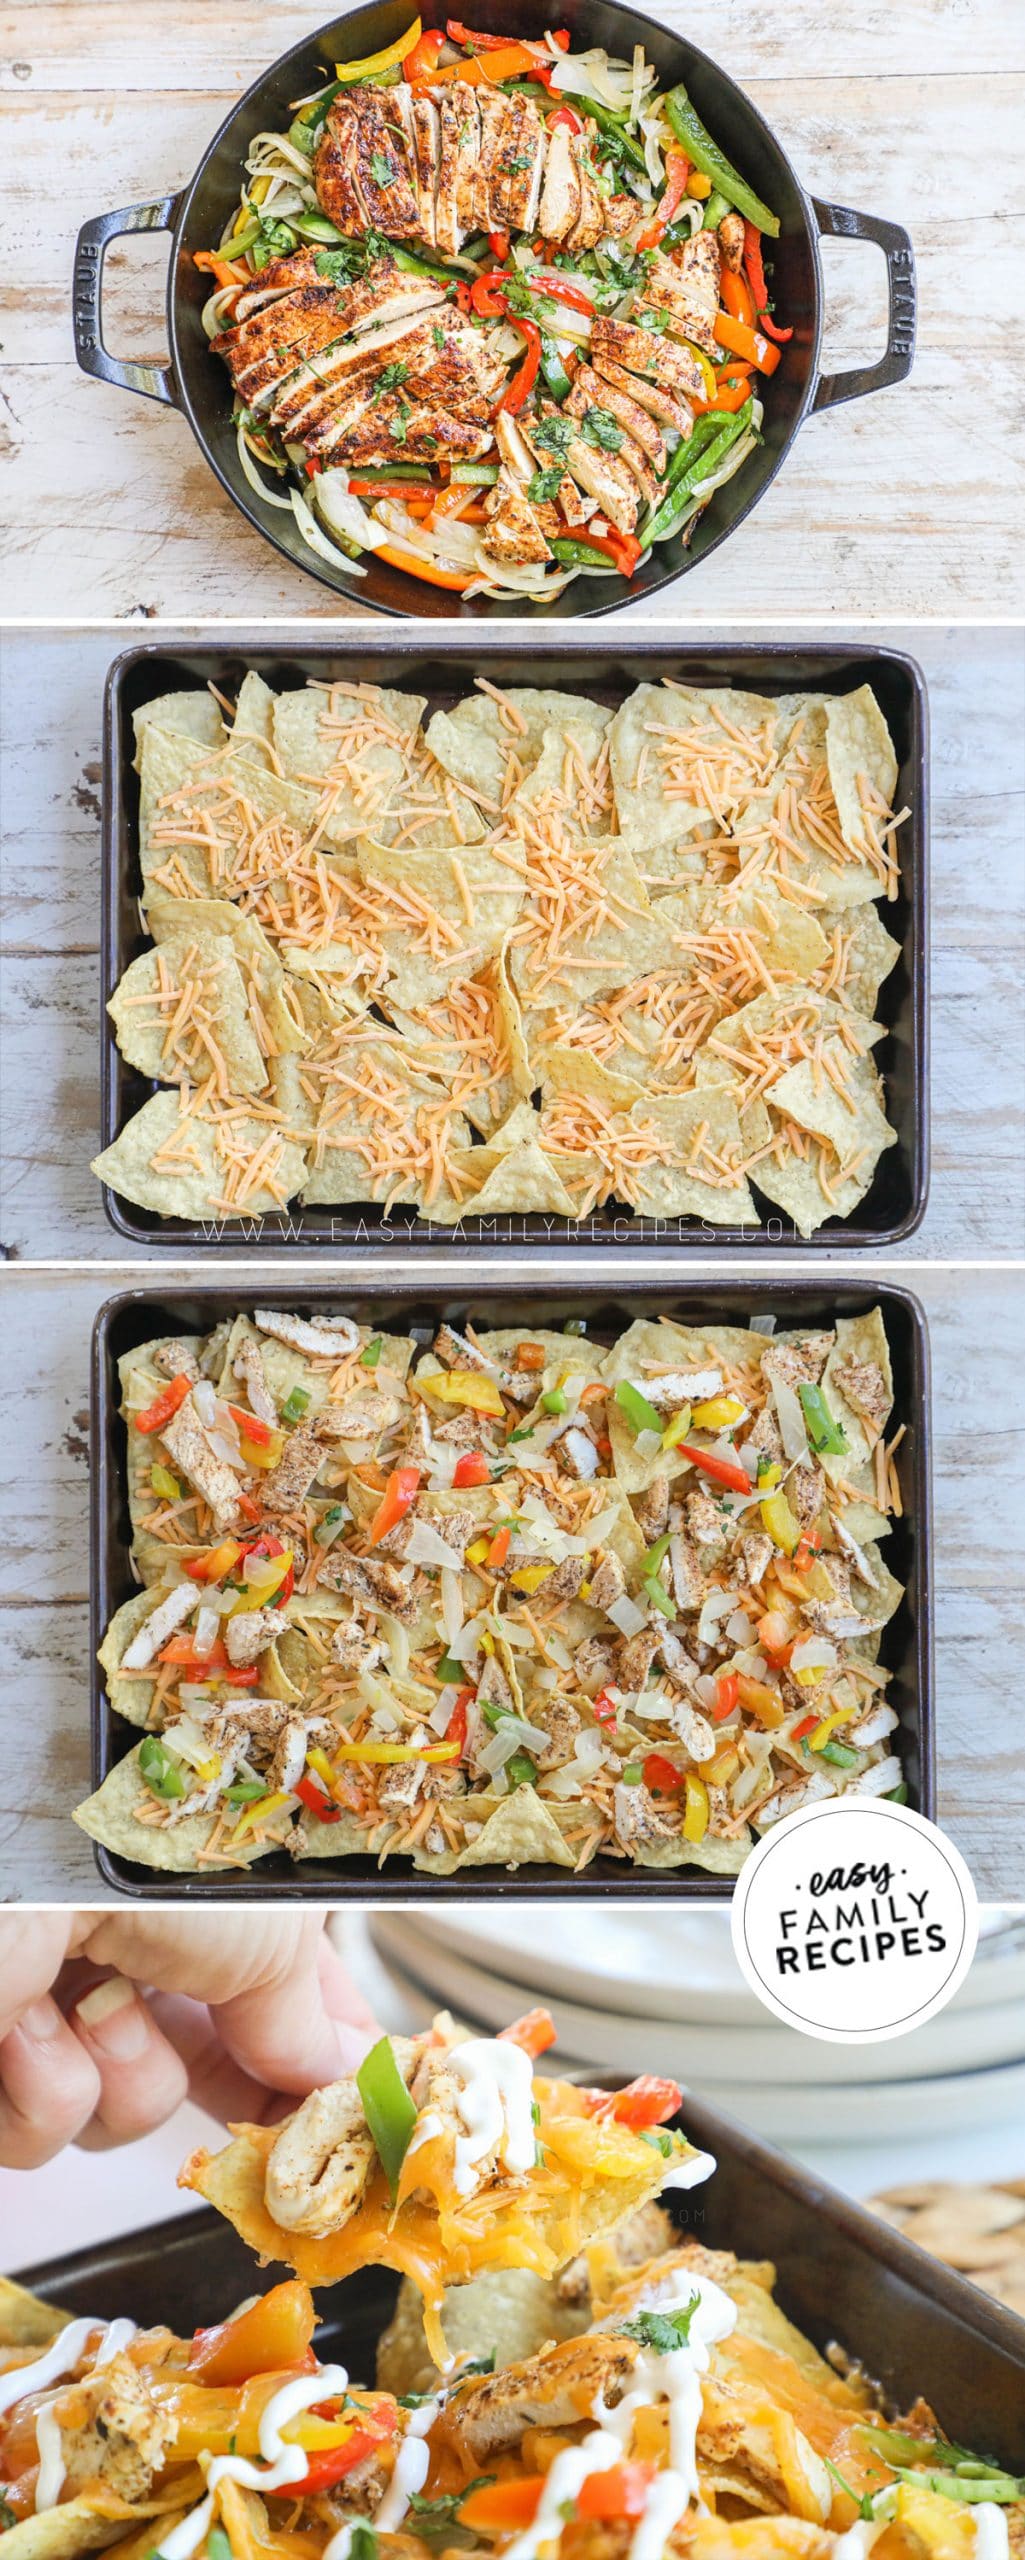 Process photos for how to make chicken fajita nachos 1.) prepare chicken fajita meat, 2. spread chips on a sheet pan. 3. Layer on cheese, chicken, peppers and onion. 4. Bake and top with pico de gallo, sour cream, and guacamole